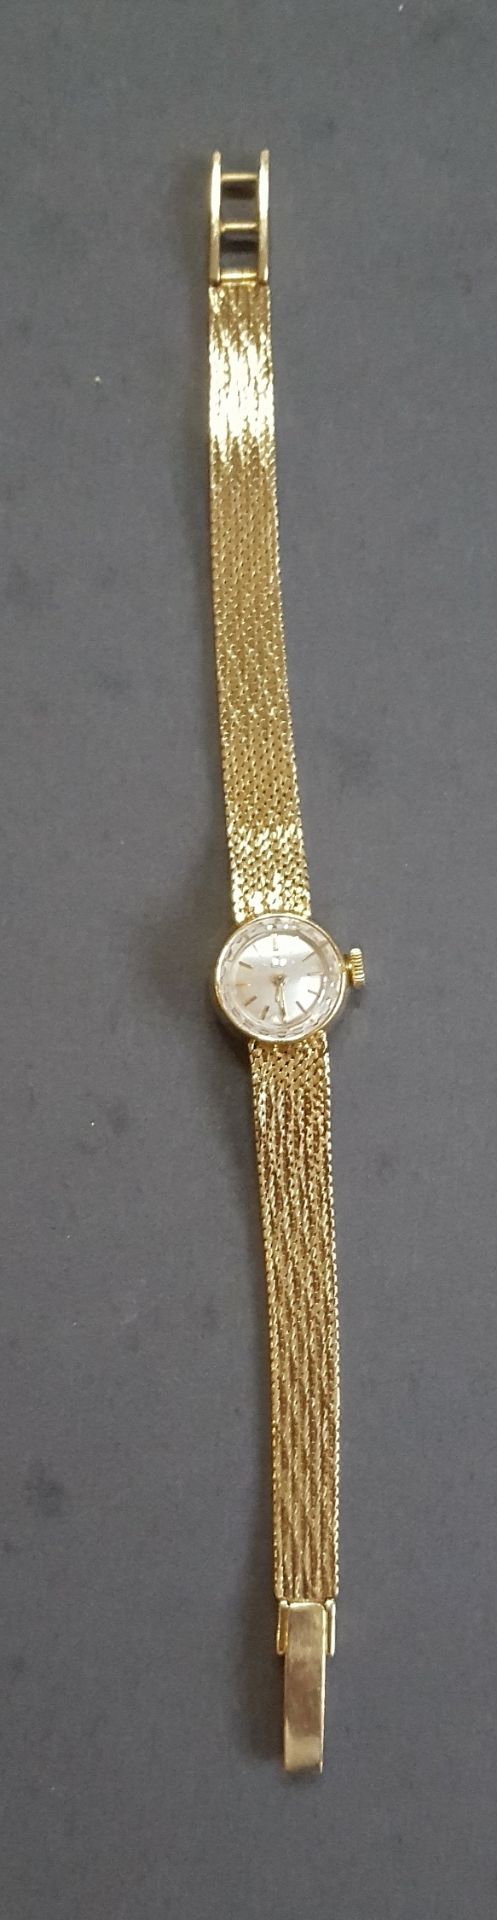 Ebel 18ct Gold Ladies Cocktail Wrist Watch Mechanical Swiss Movement - Image 2 of 4